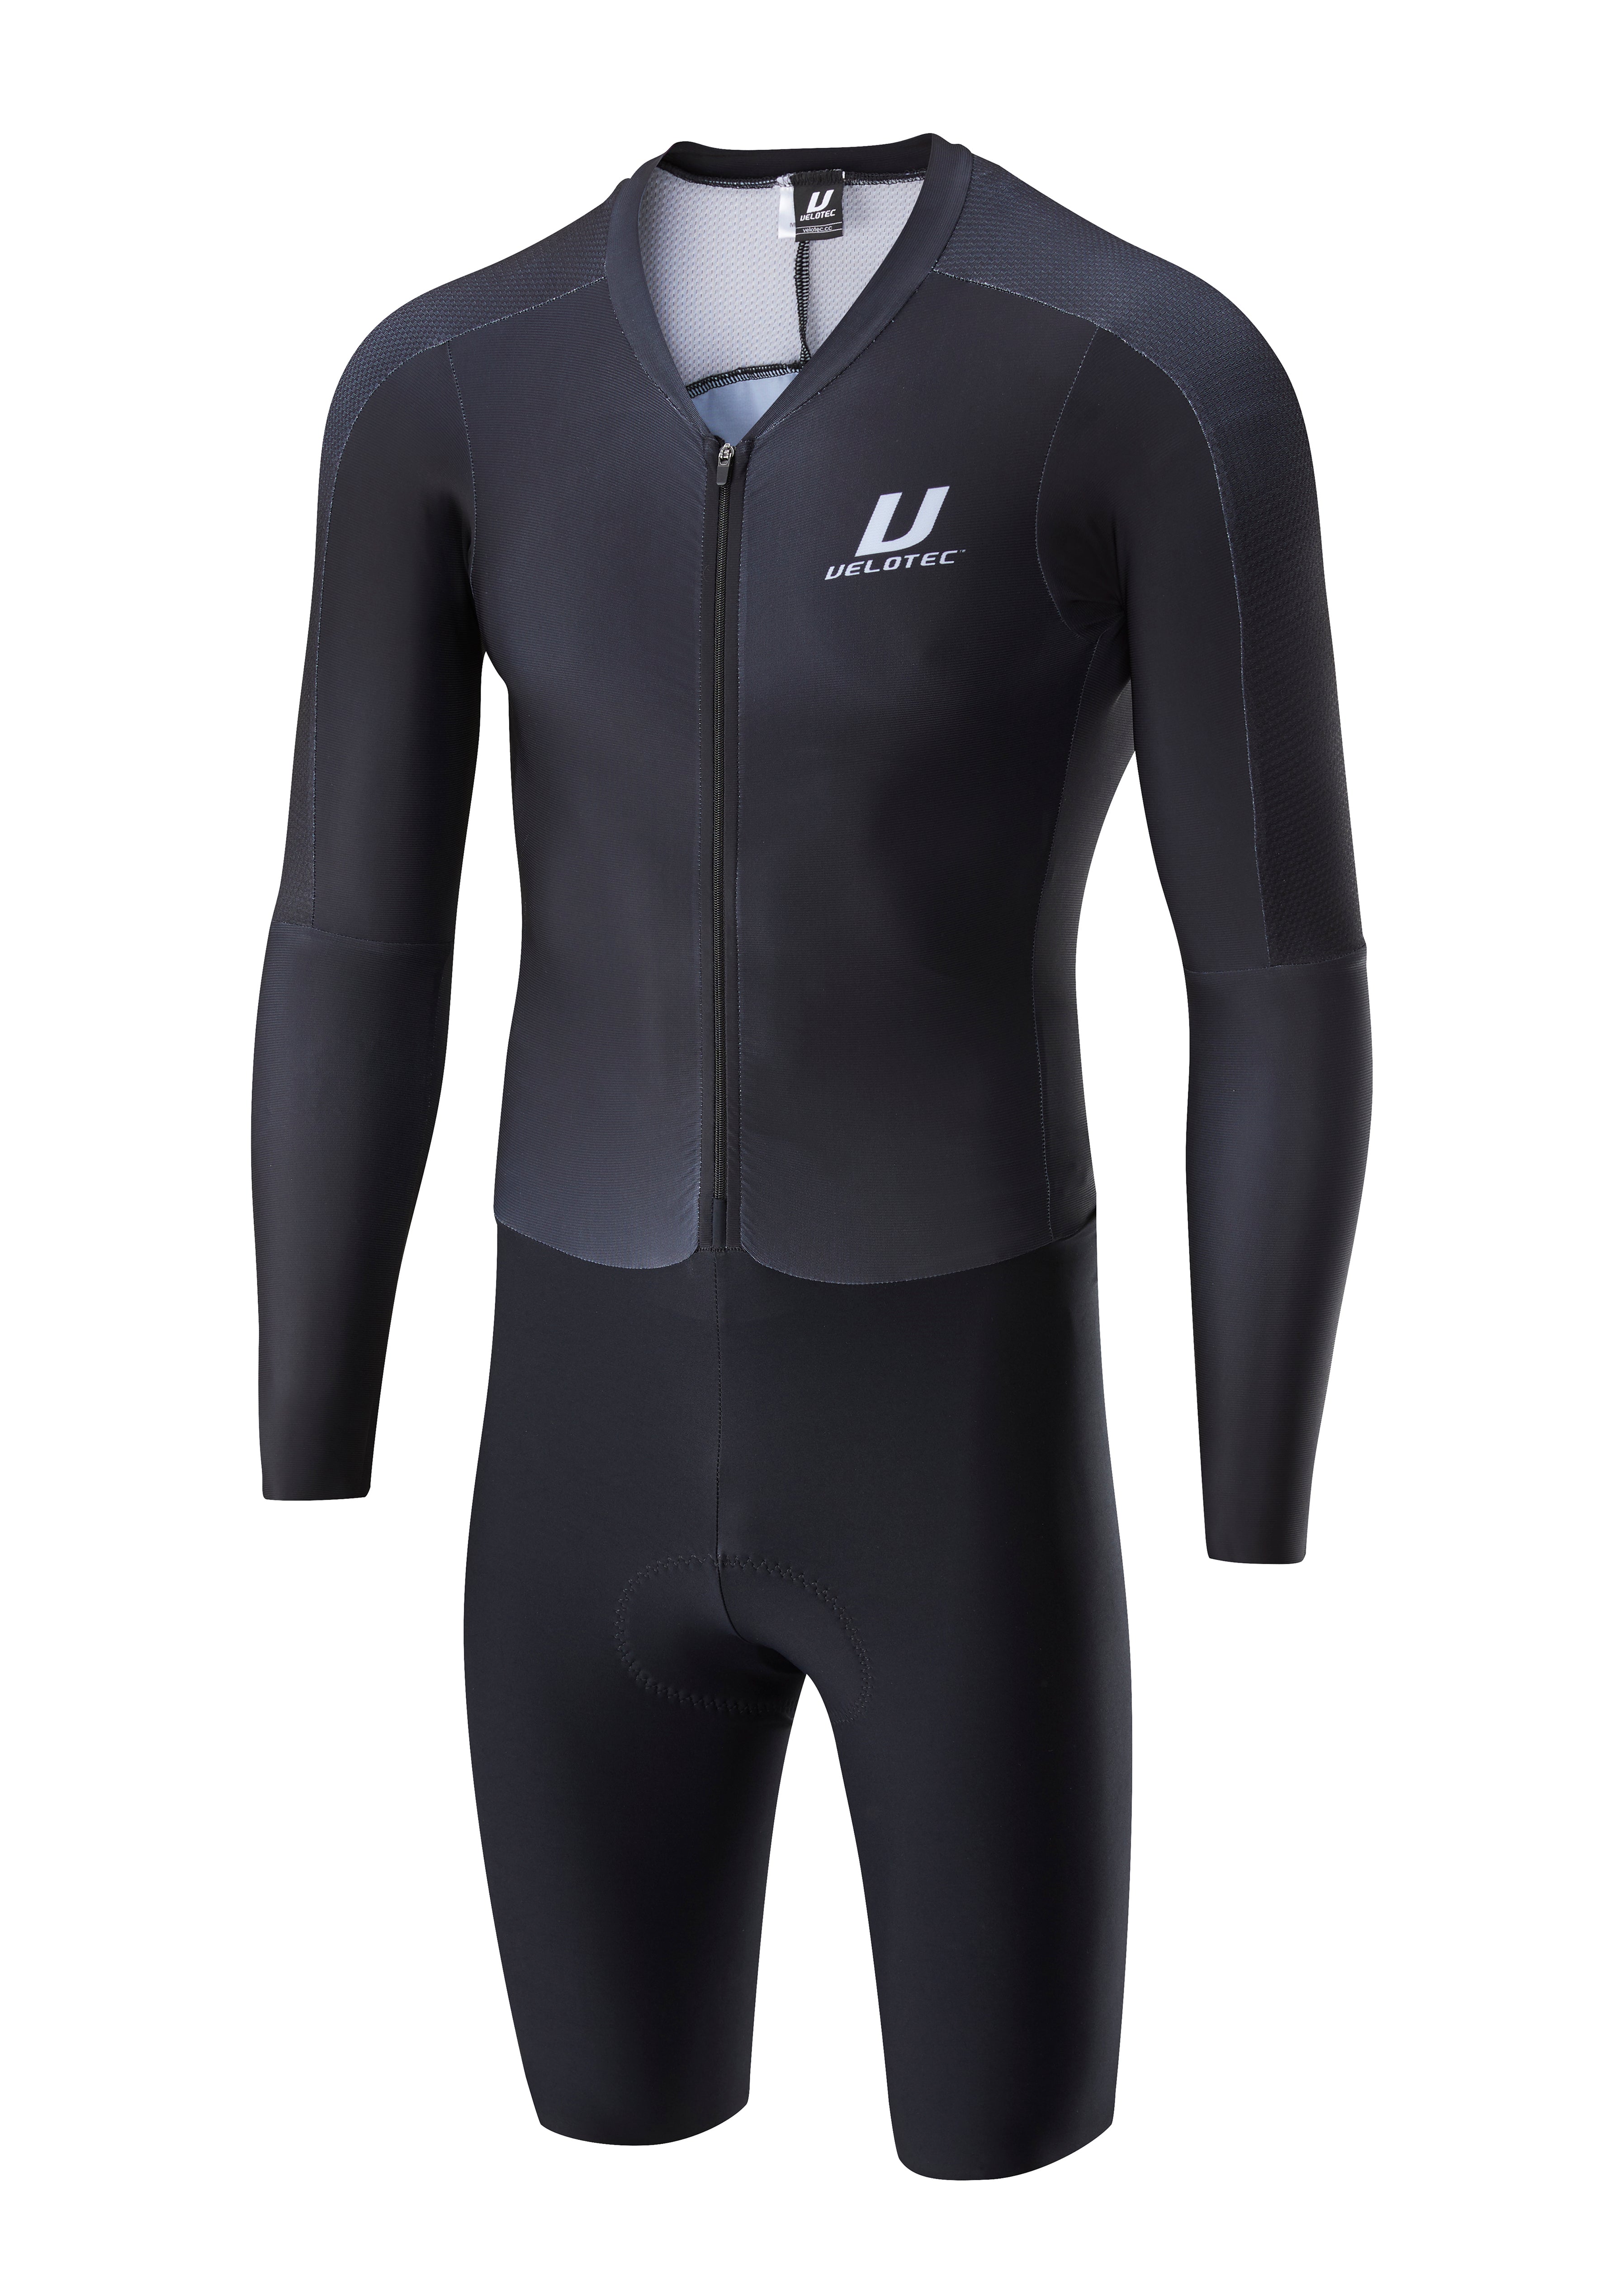 Made to Measure - PRO8 Speedsuit (UCI Legal) – Velotec